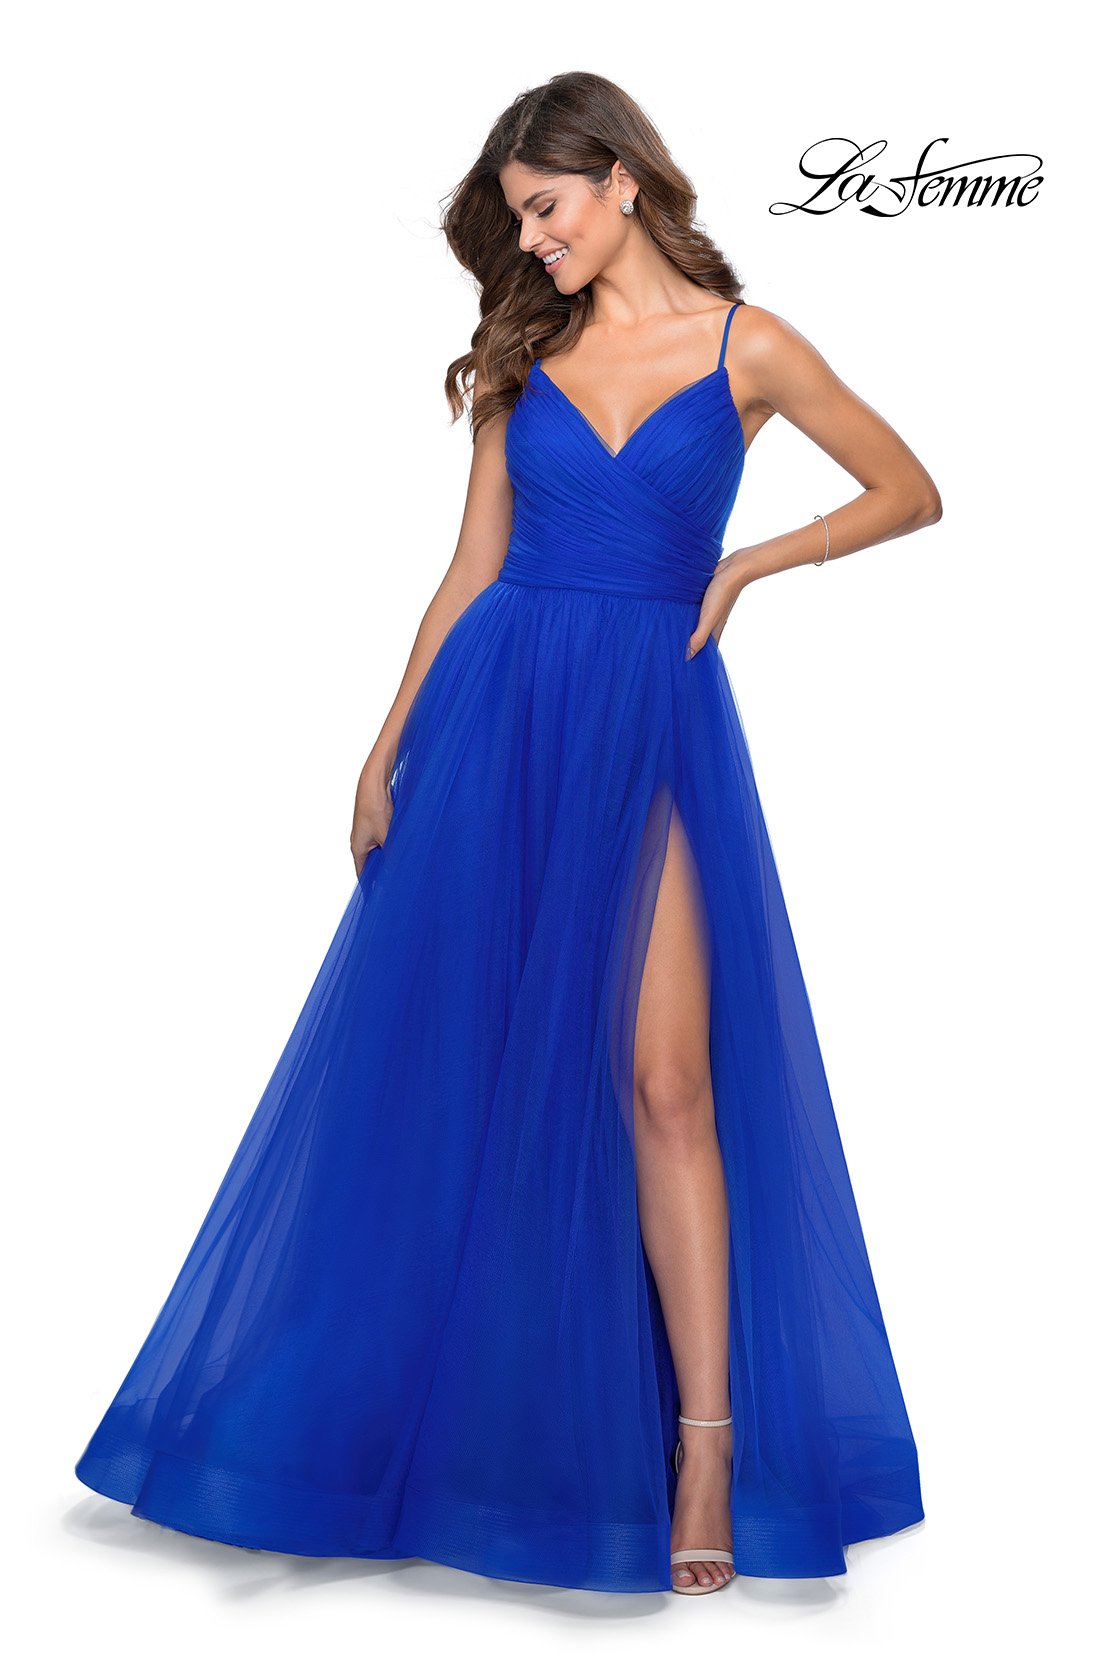 La Femme 28561 dress images in these colors: Neon Pink, Royal Blue, Yellow.